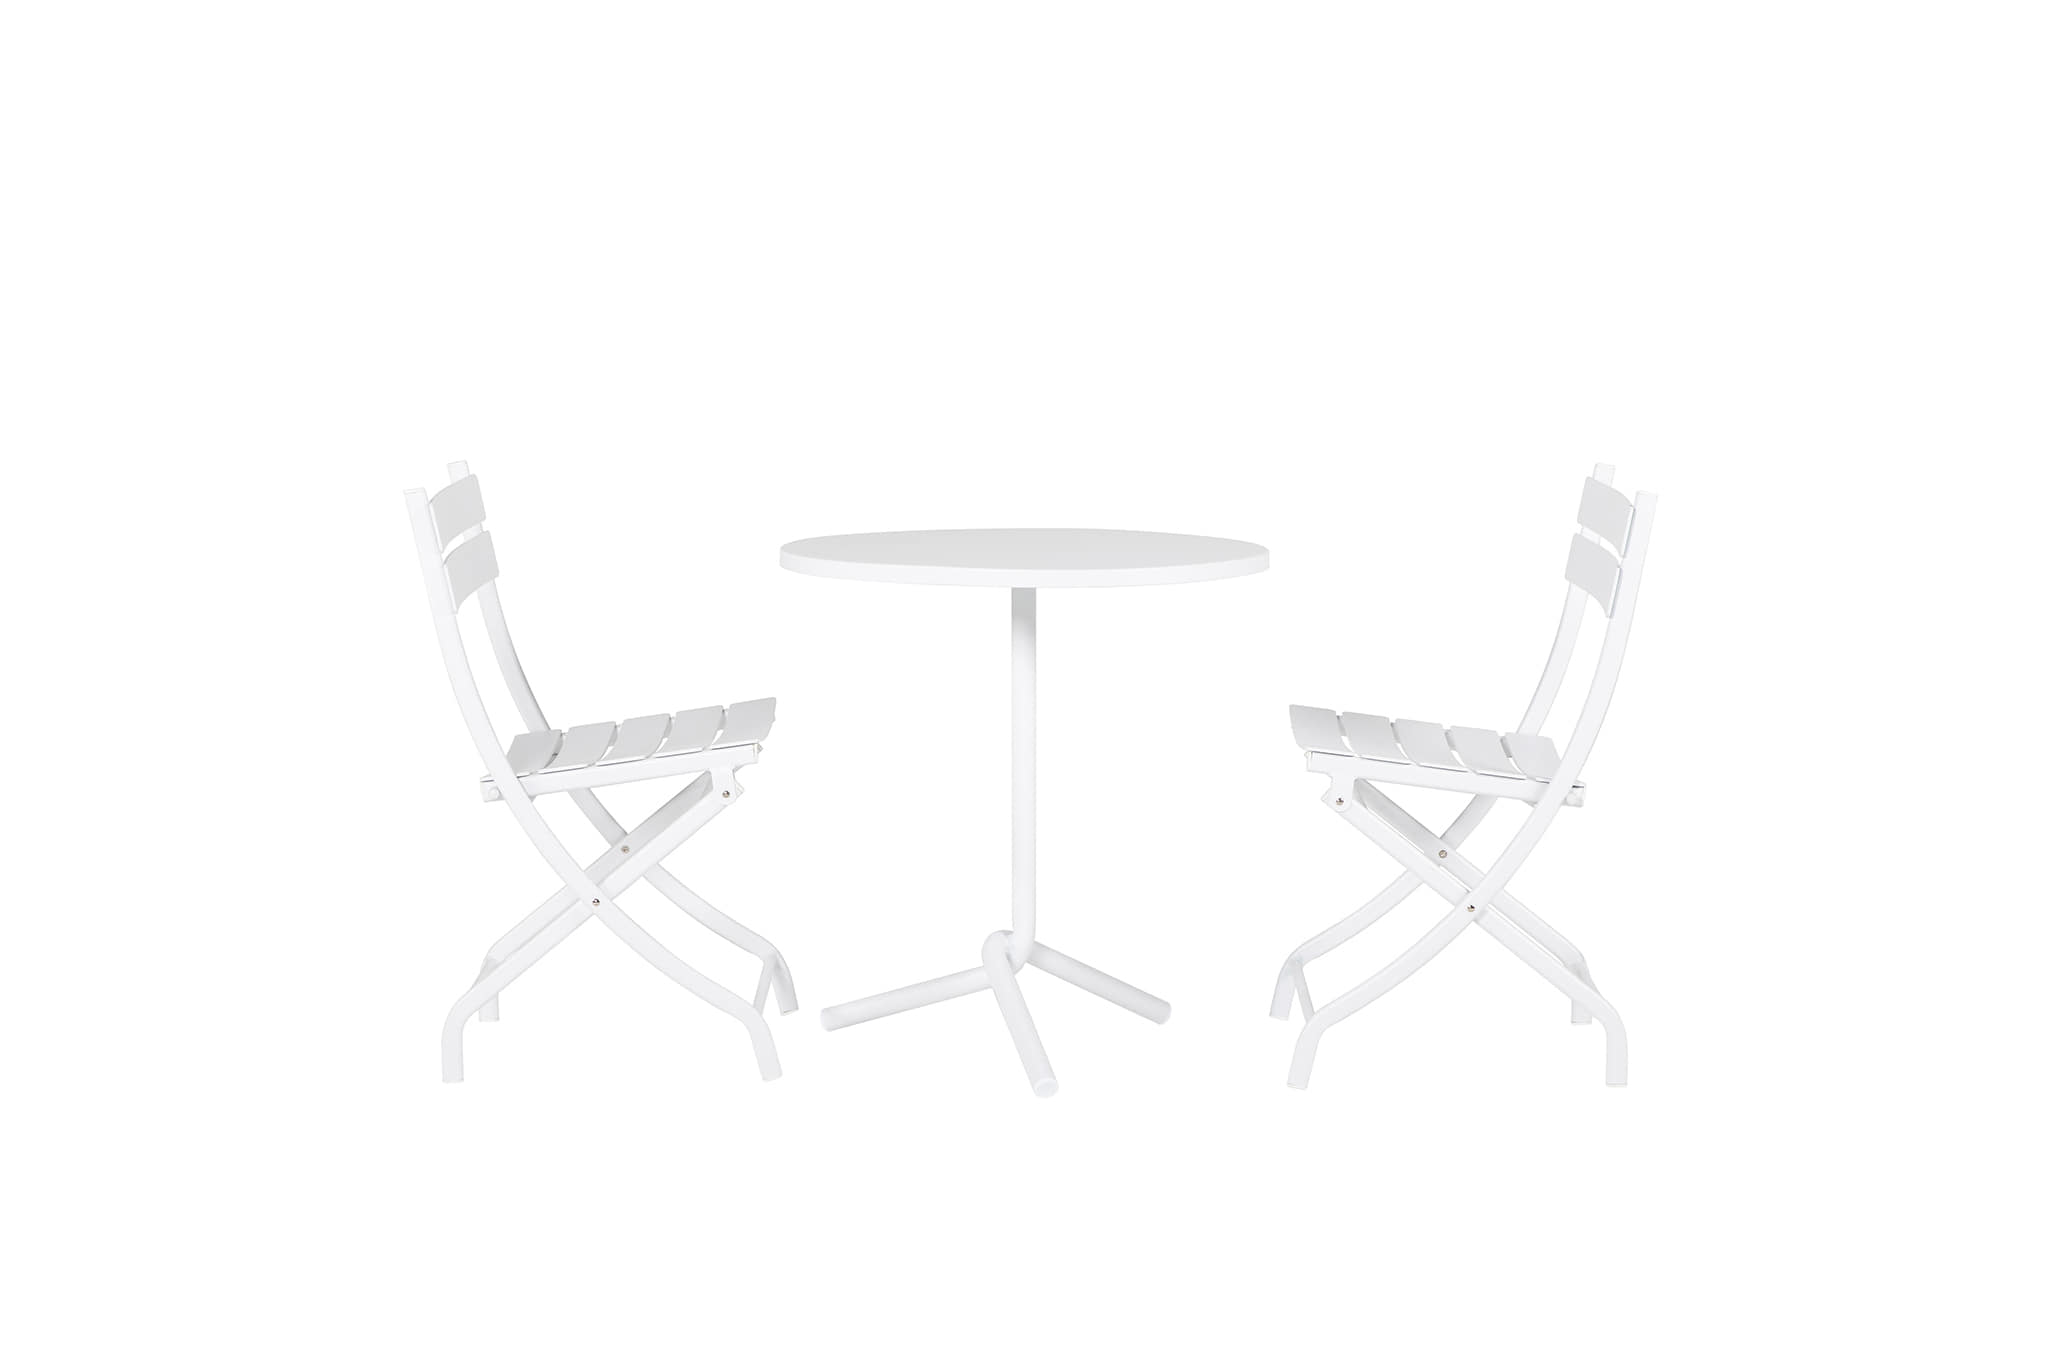 Focus Net_Dosent Net Folding Tail Dining Set for Two